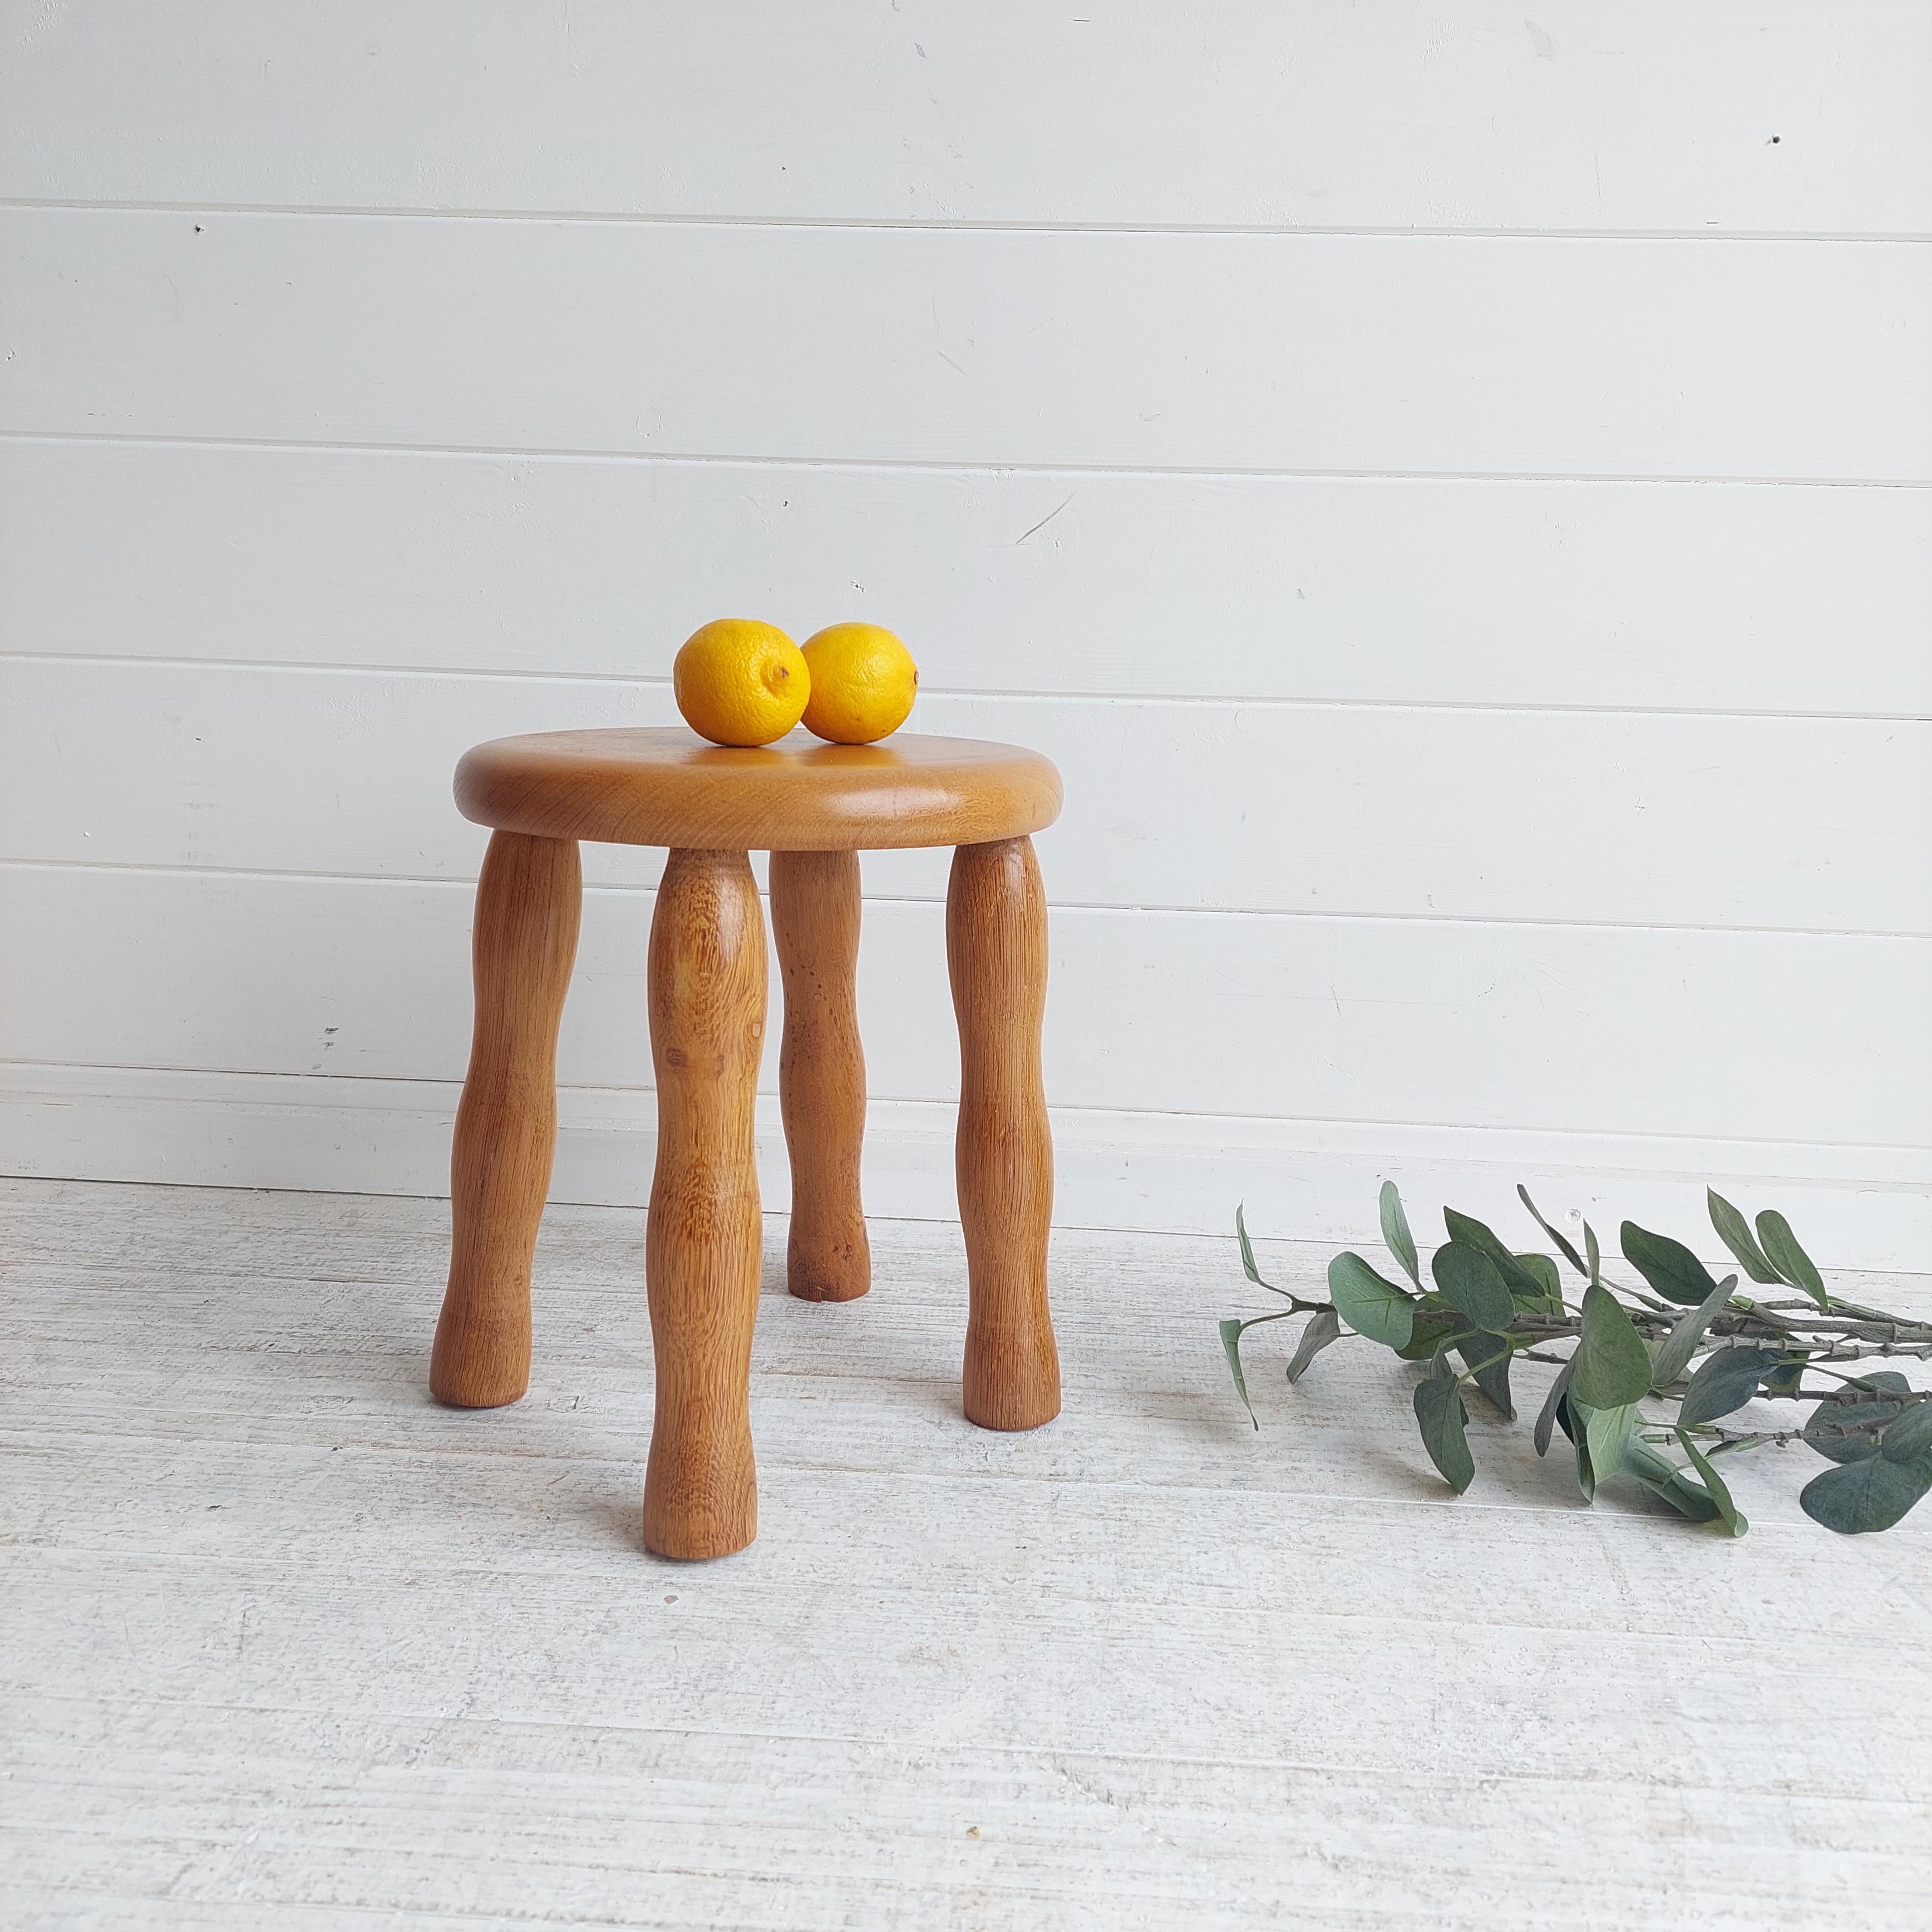 A delightful Elm milking stool 
Gorgeous carved bobbin legs
A lovely Scandinavian Mid Century Elm stool.
Probably from the 60s

Solid top and legs
With marvelous elm grain.
Having wavy bobbin legs.
Seat with round shape
Four legged stool

A great